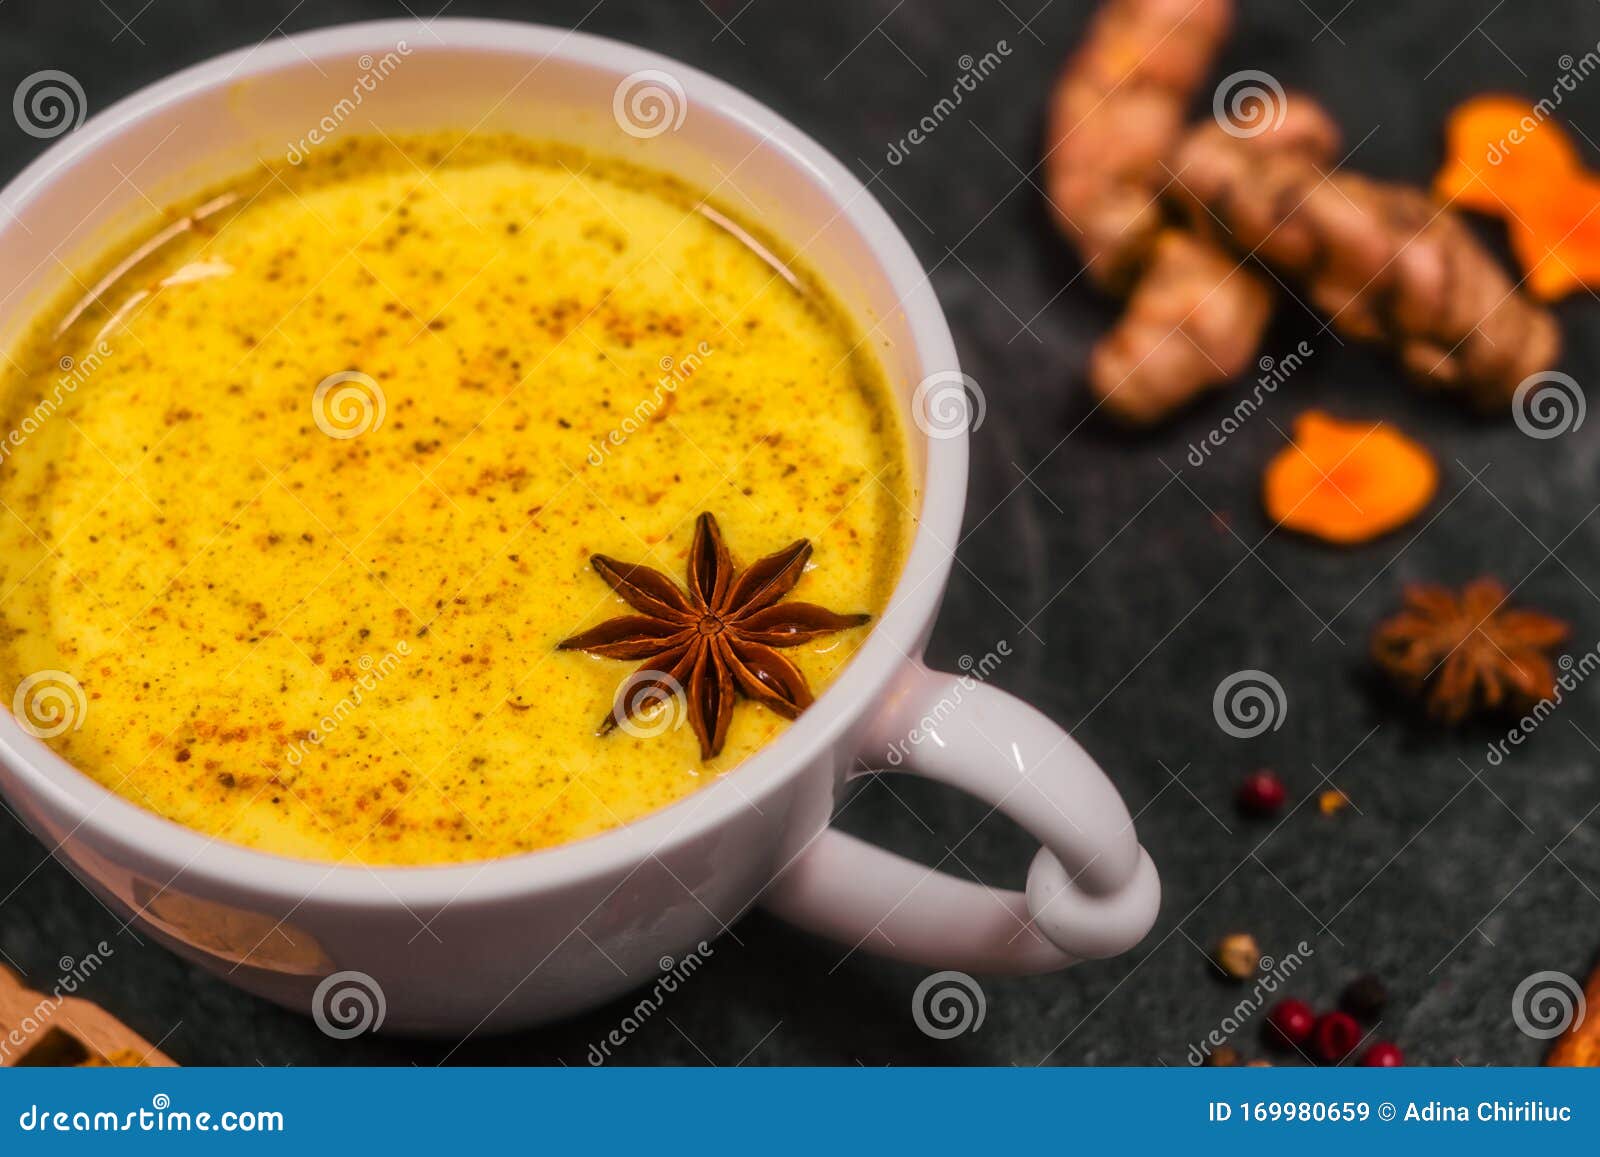 Traditional Indian Drink, Golden Milk Stock Image - Image of drink ...